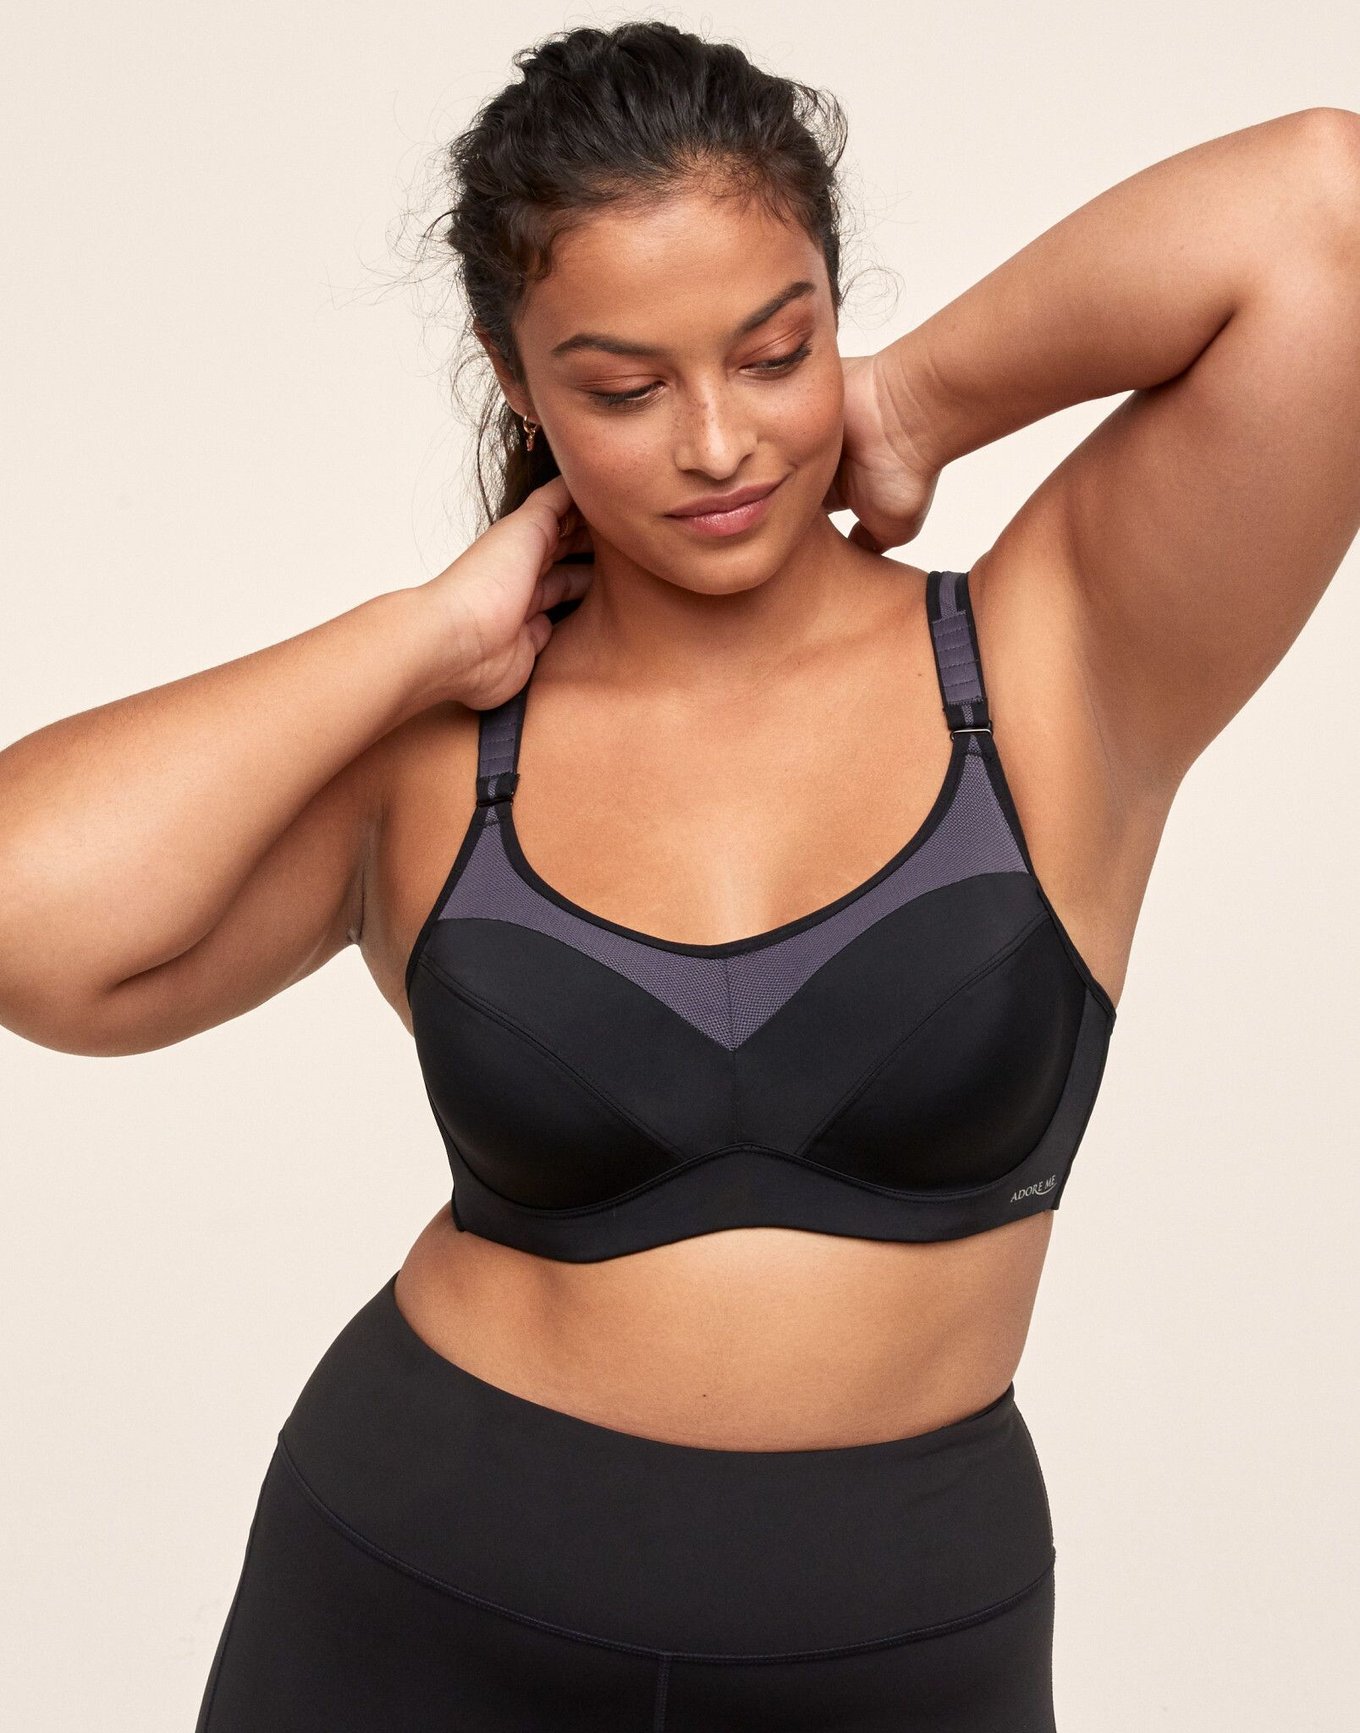 Bra Size in Inches Plus Size Panties Best Sports Bra for DDD